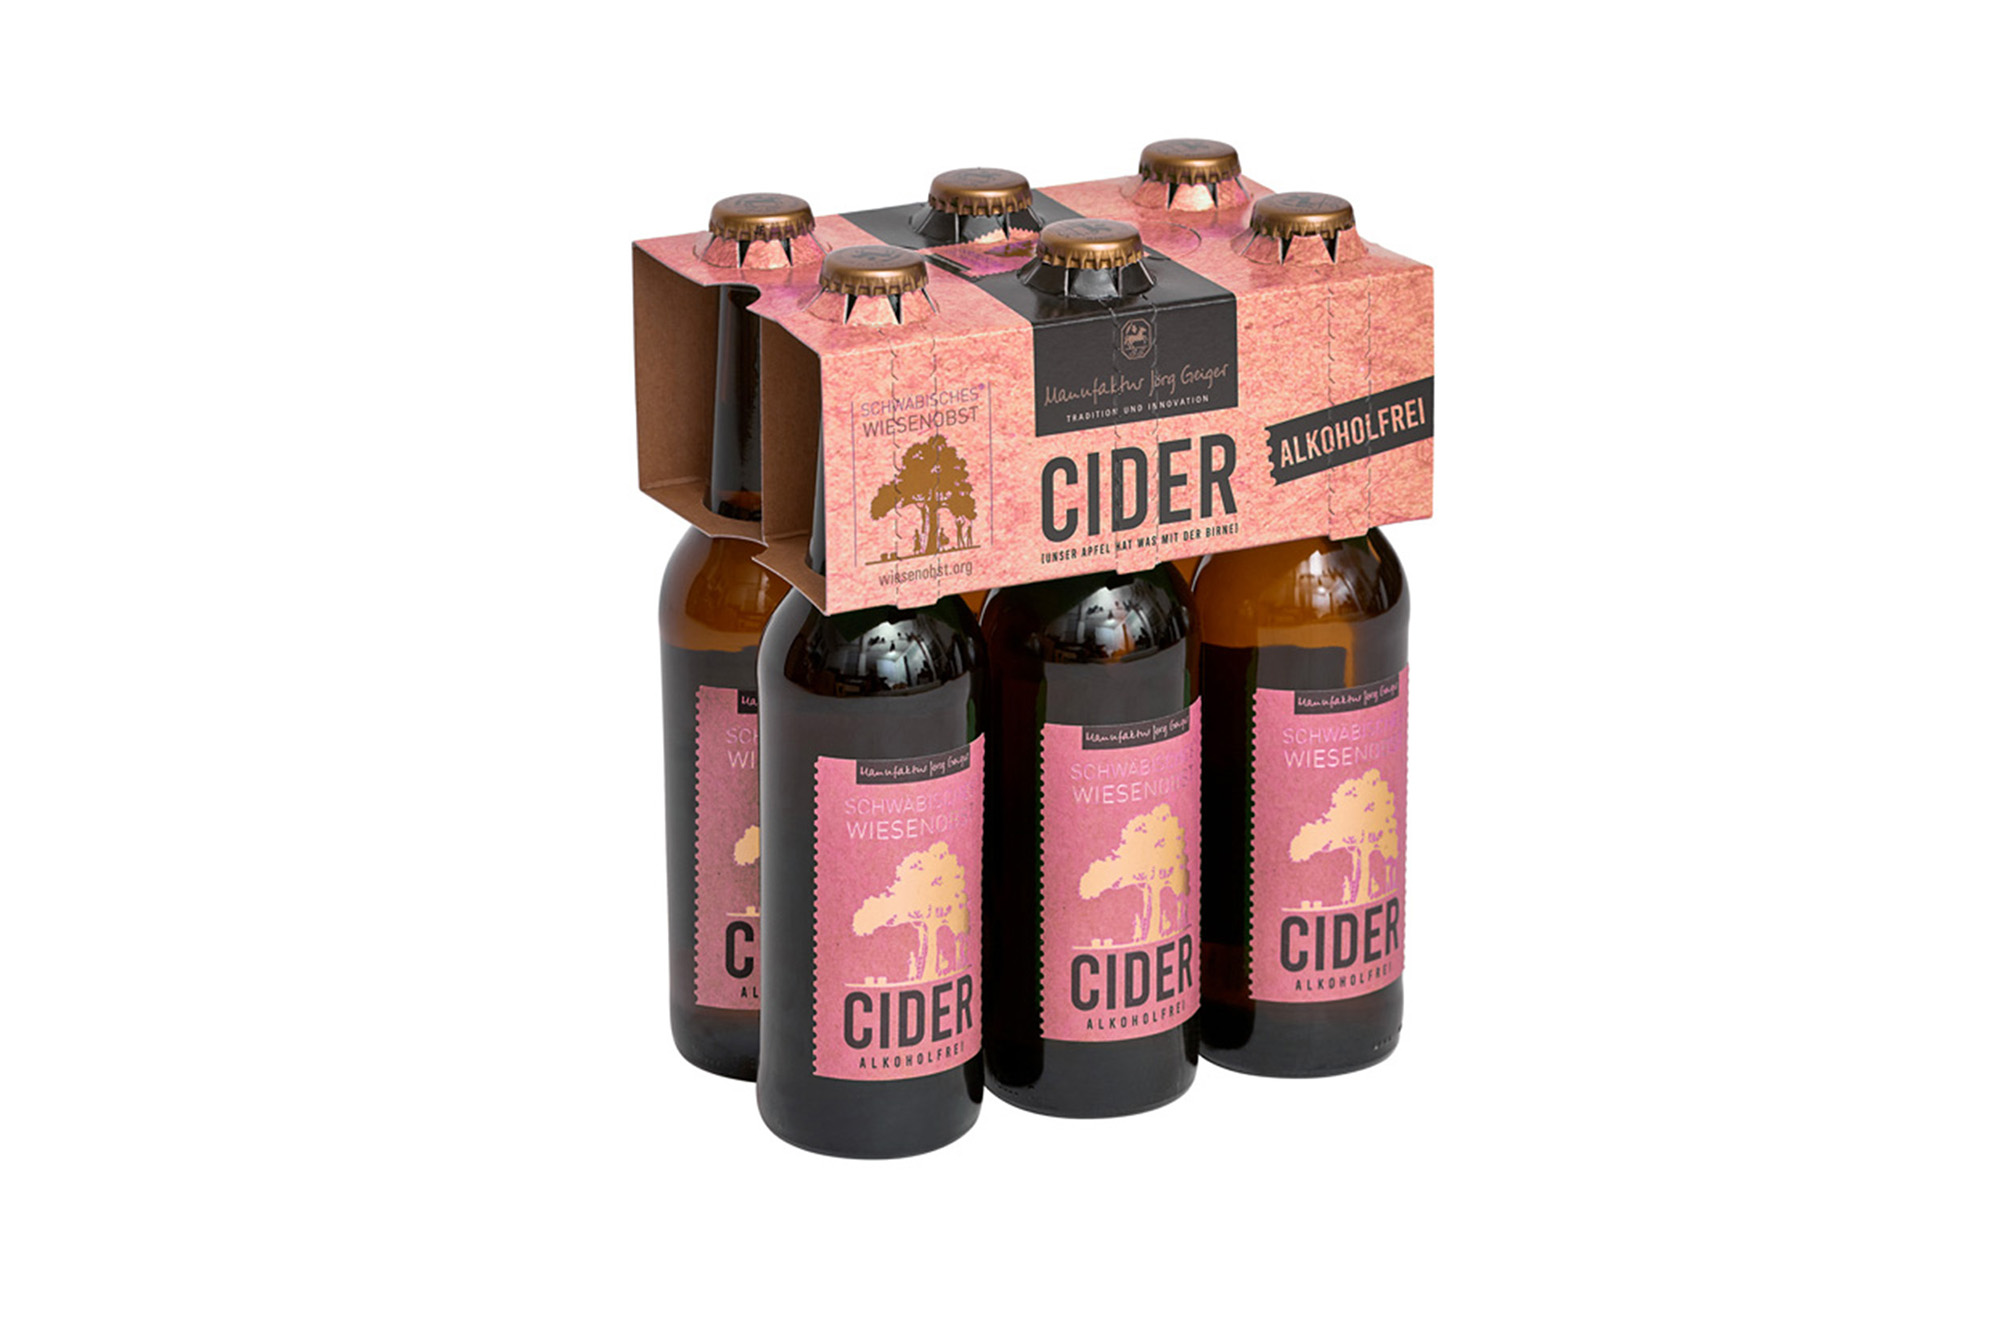 Swabian MeadowFruit Cider rosé - alcohol free dry in sixpack